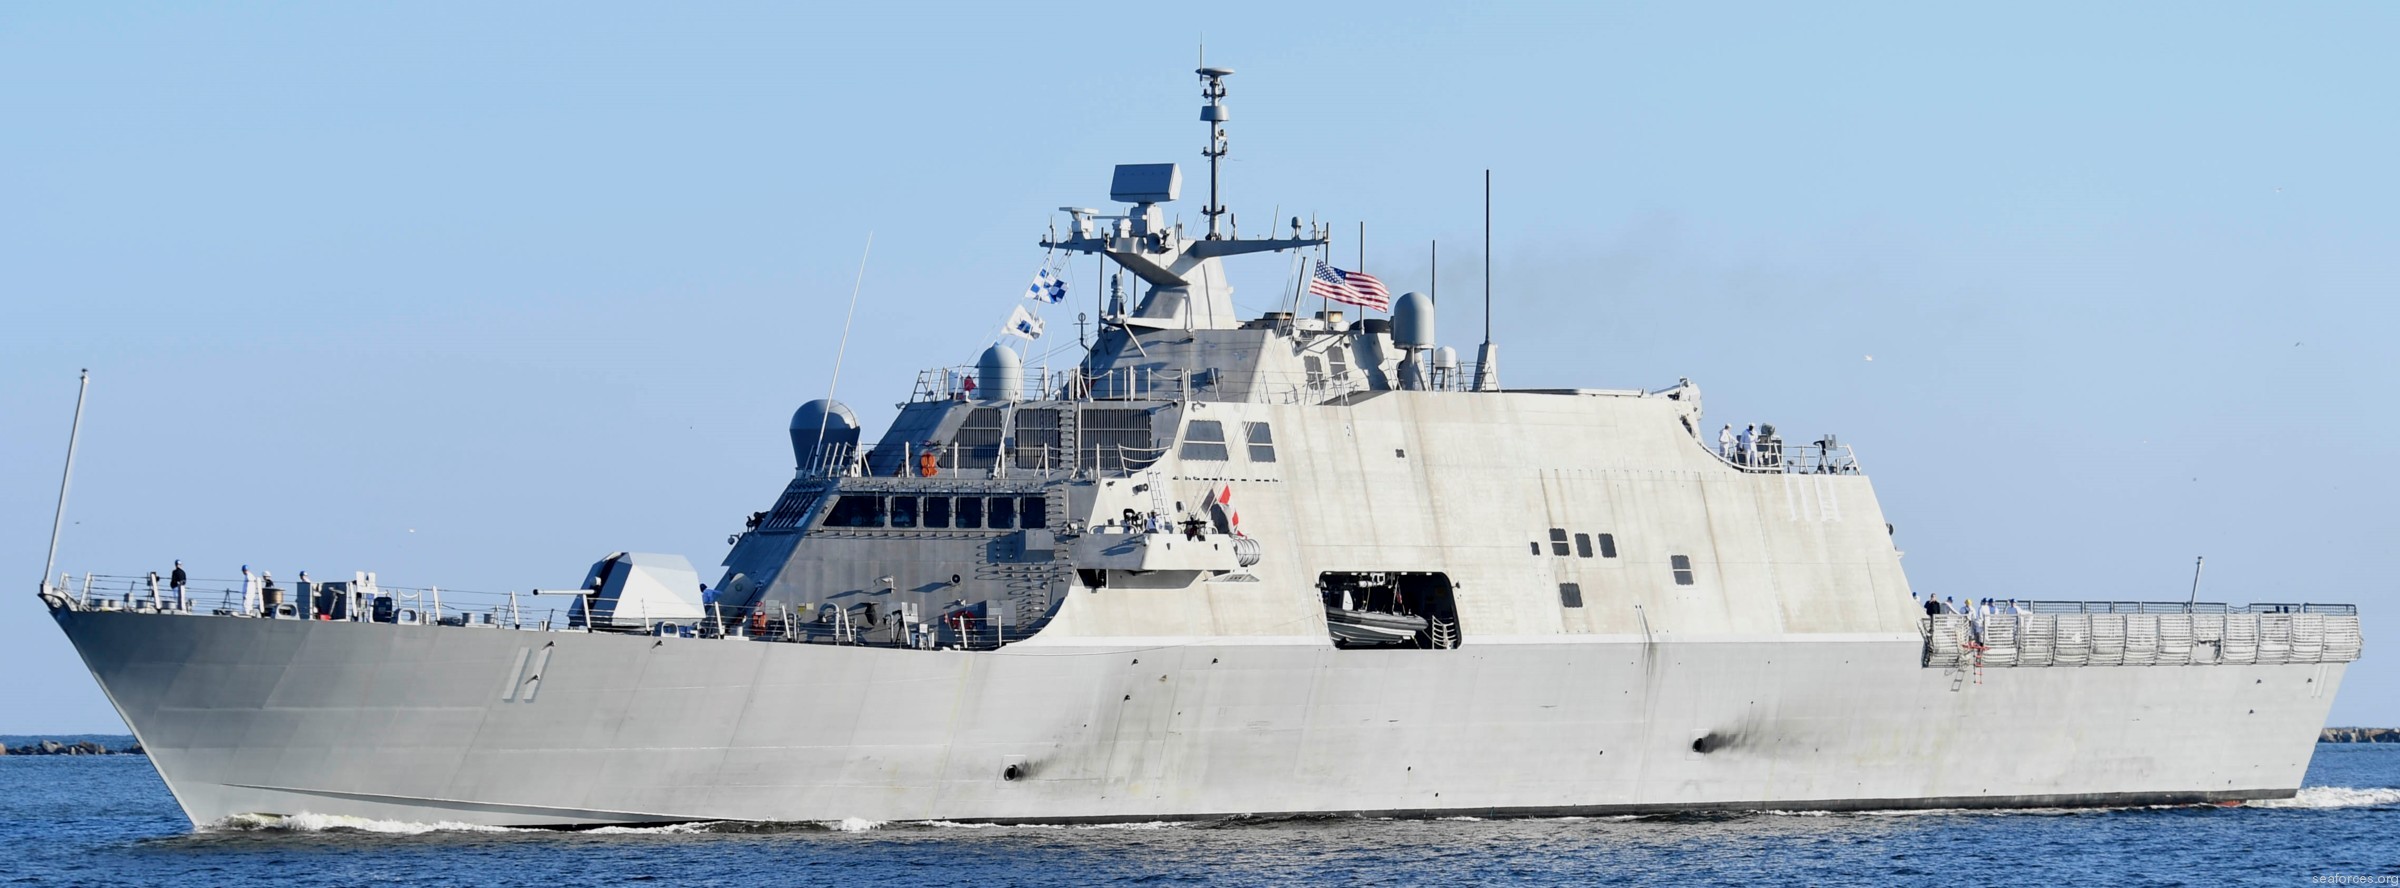 lcs-11 uss sioux city freedom class littoral combat ship 14 homeport mayport florida